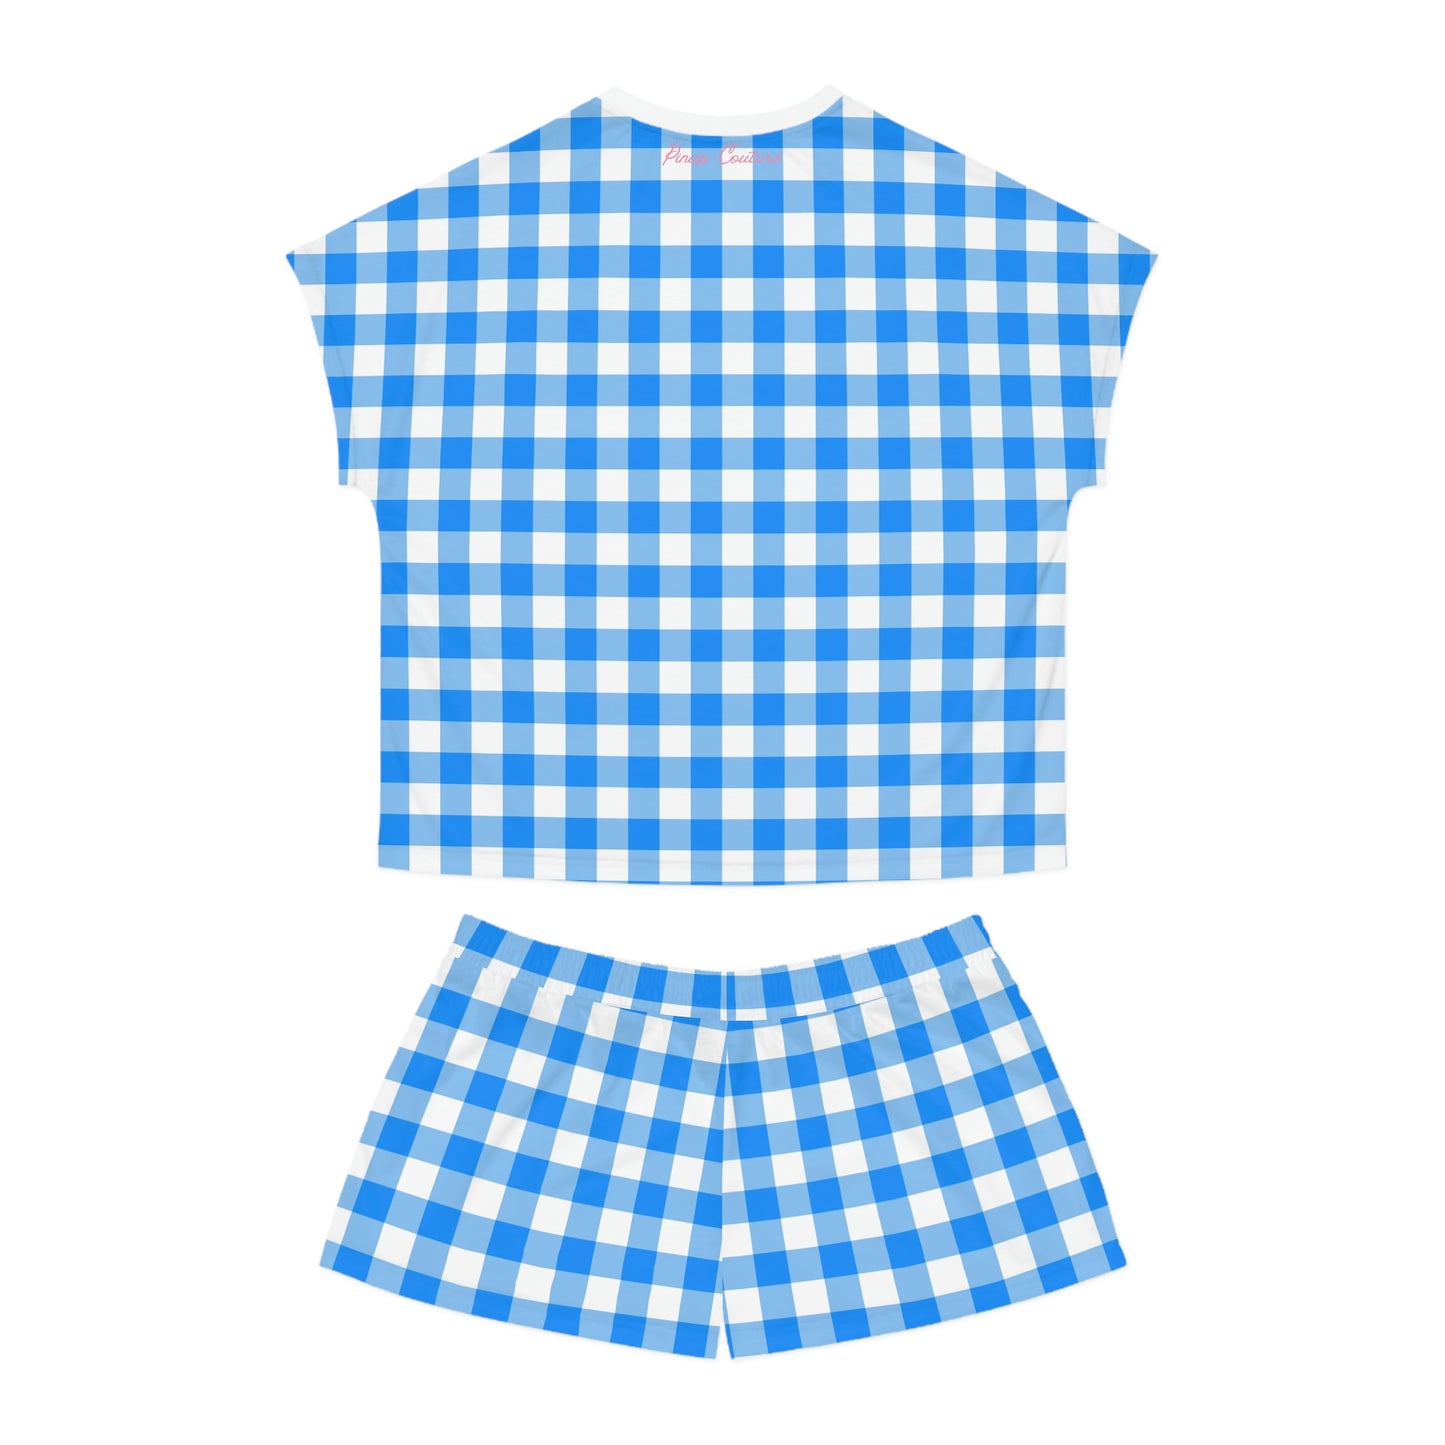 TGIF Sleepover PJs in Beyond Blue Gingham Tee & Pajama Shorts-Set | Pinup Couture Relaxed